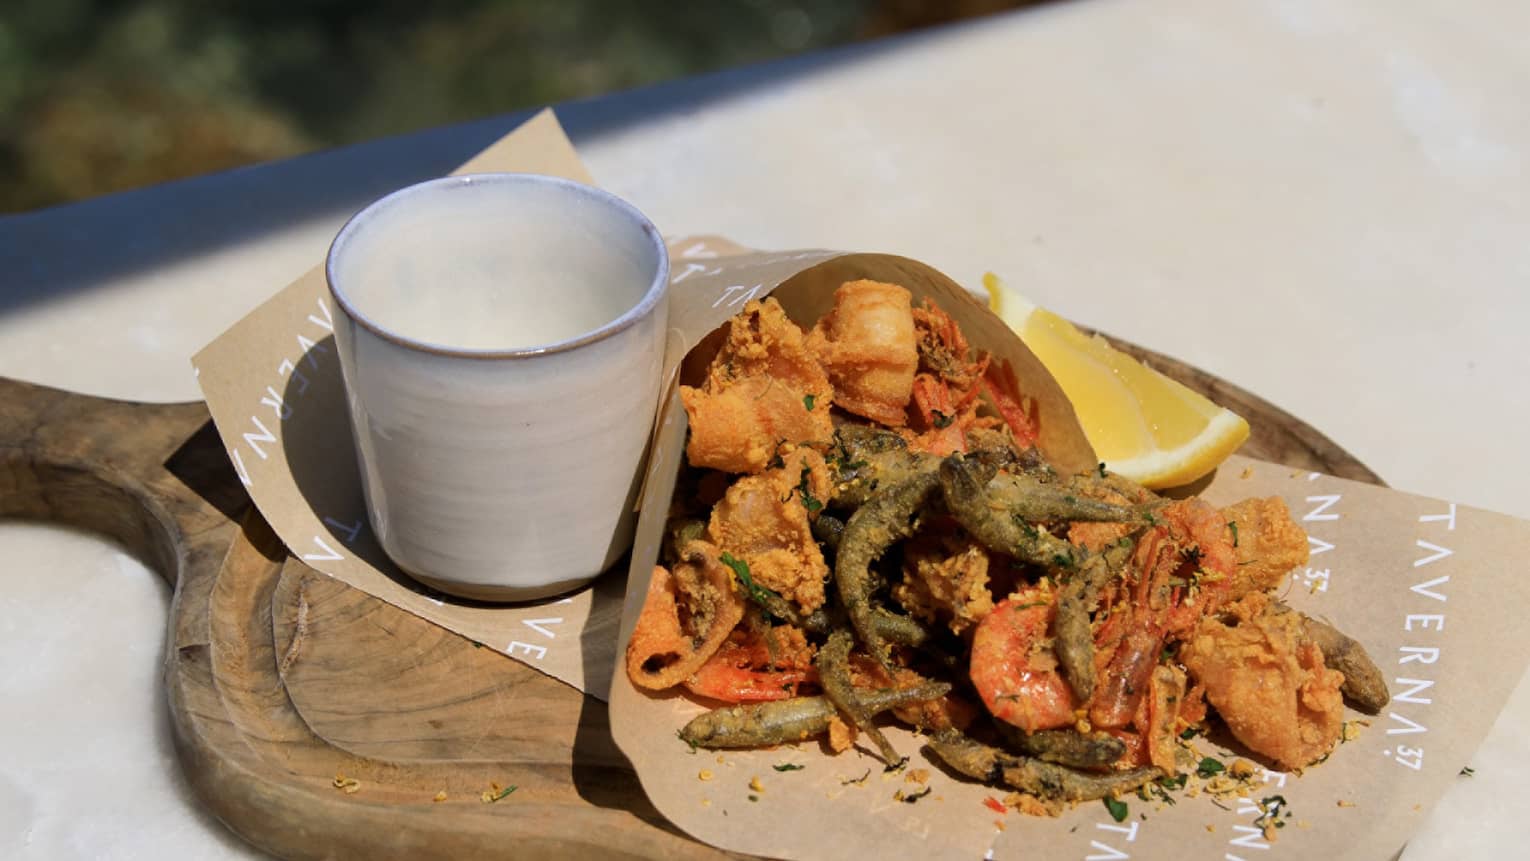 Fried seafood wrapped in paper on cutting board with cup of caper sauce and lemon wedge